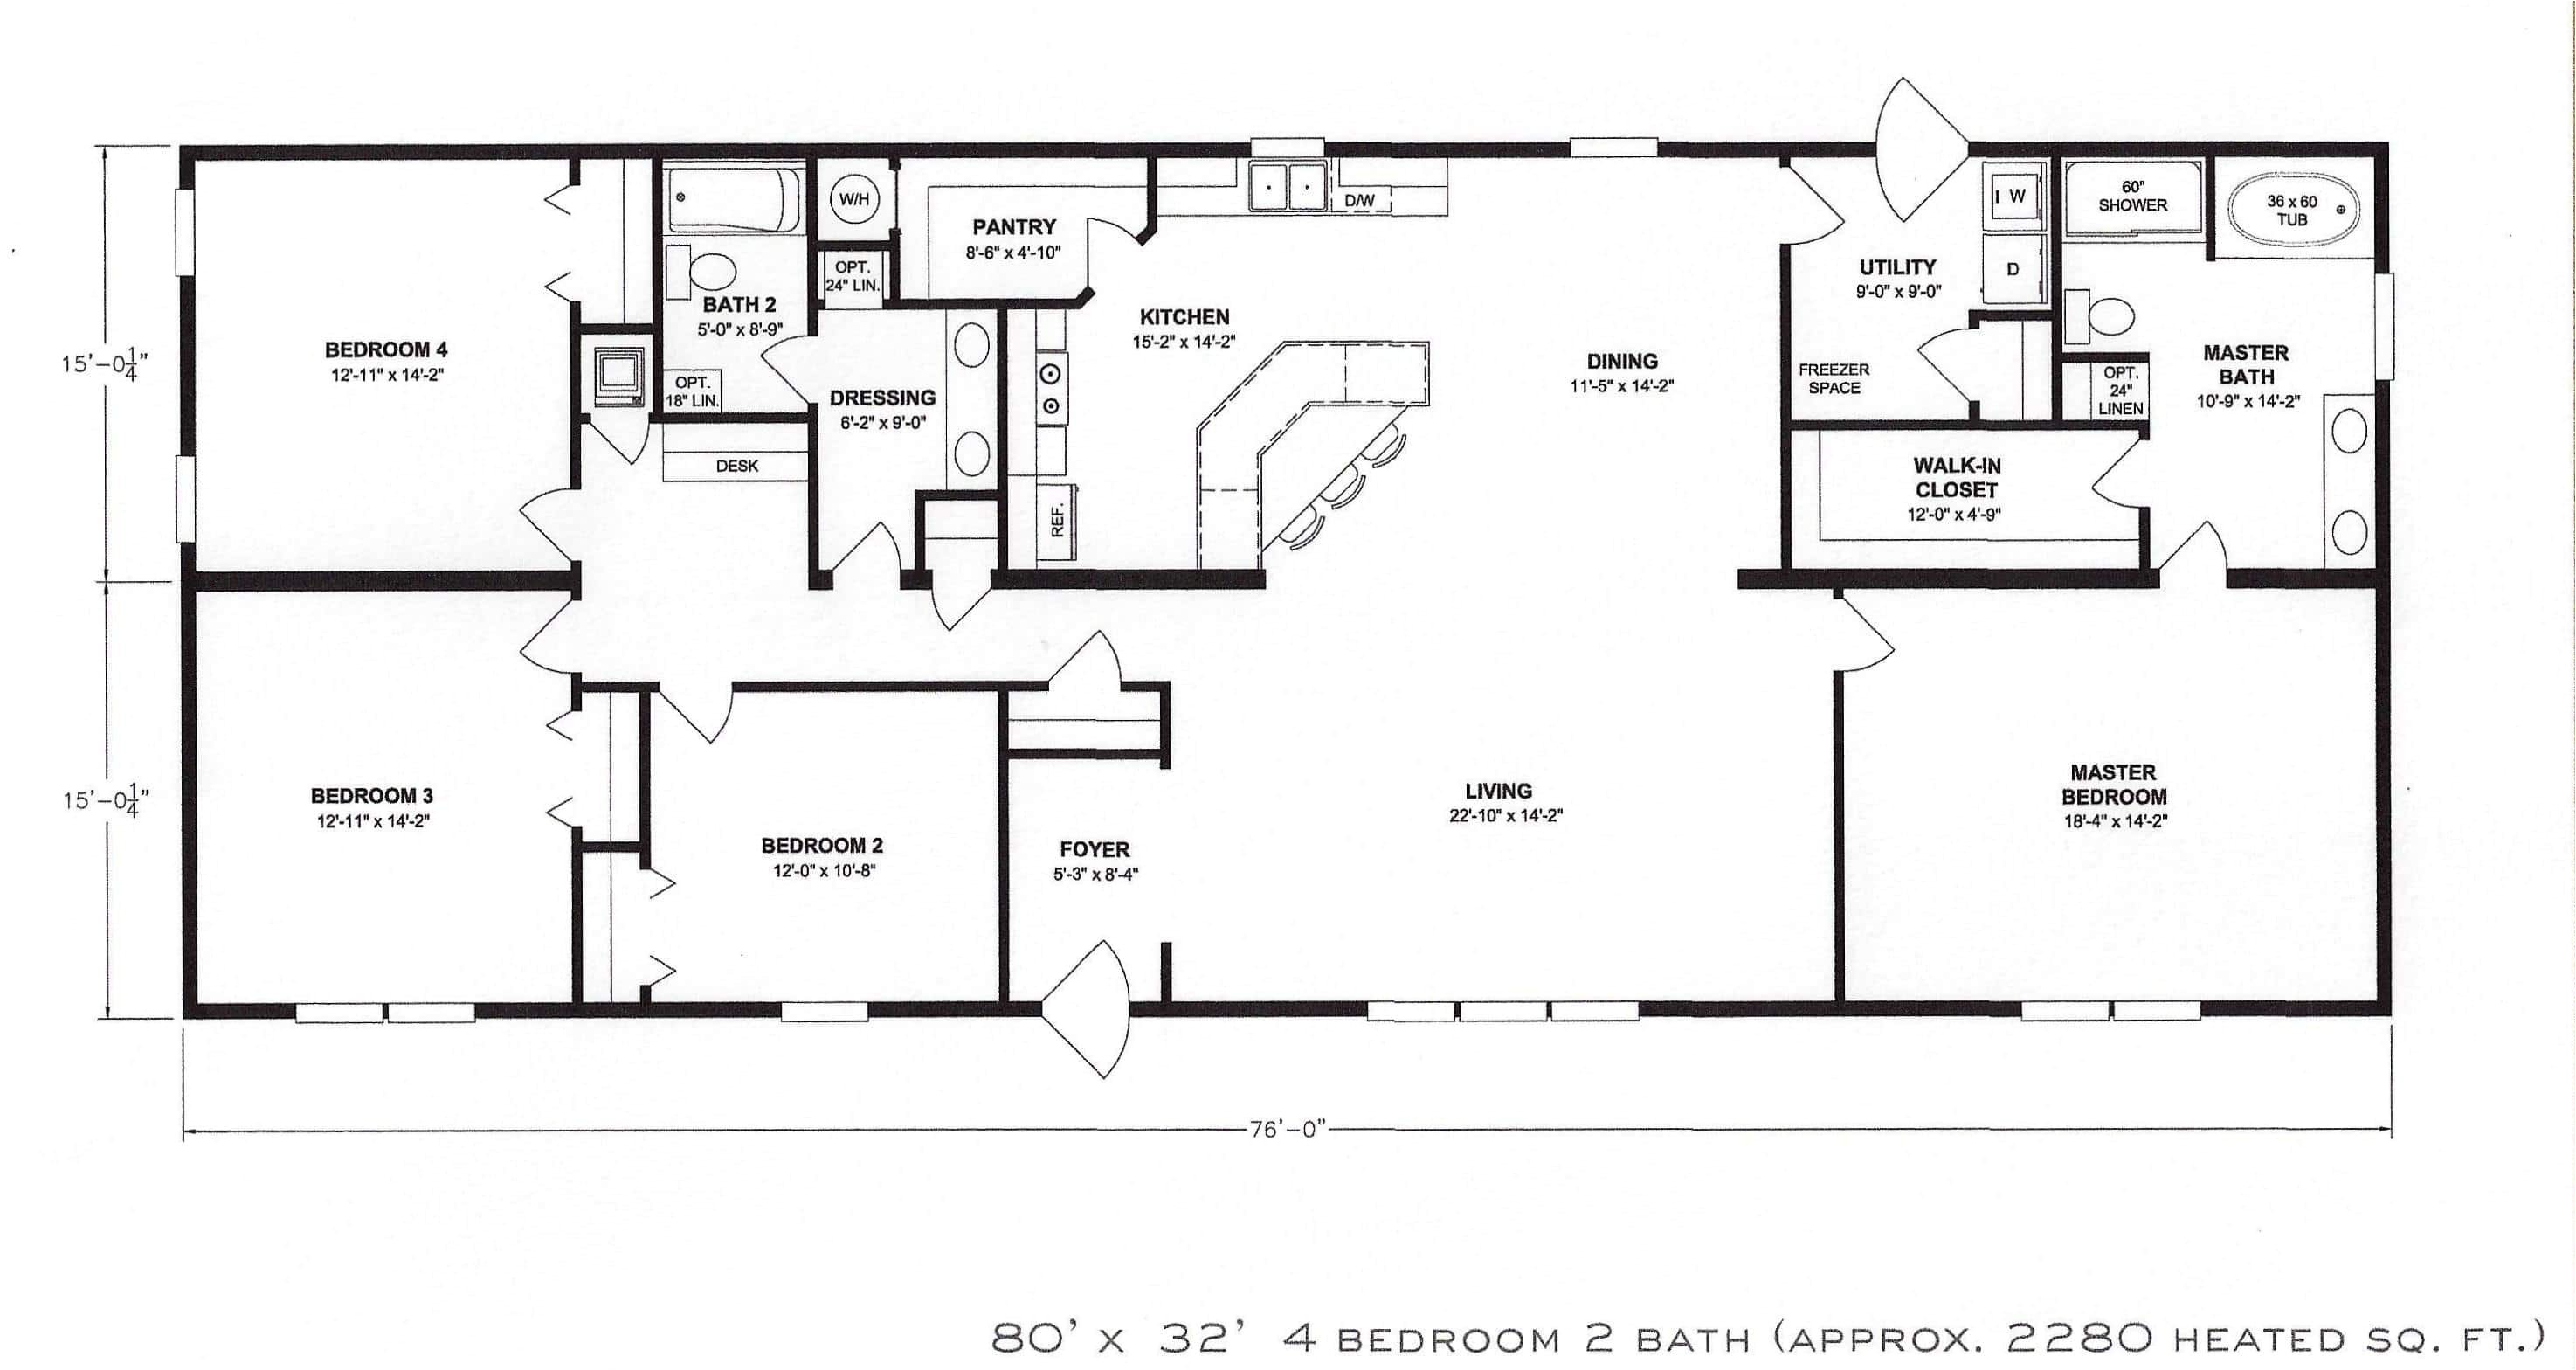 Floor Plans for 4 Bedroom Homes Best Ideas About Bedroom House Plans Country and 4 Open